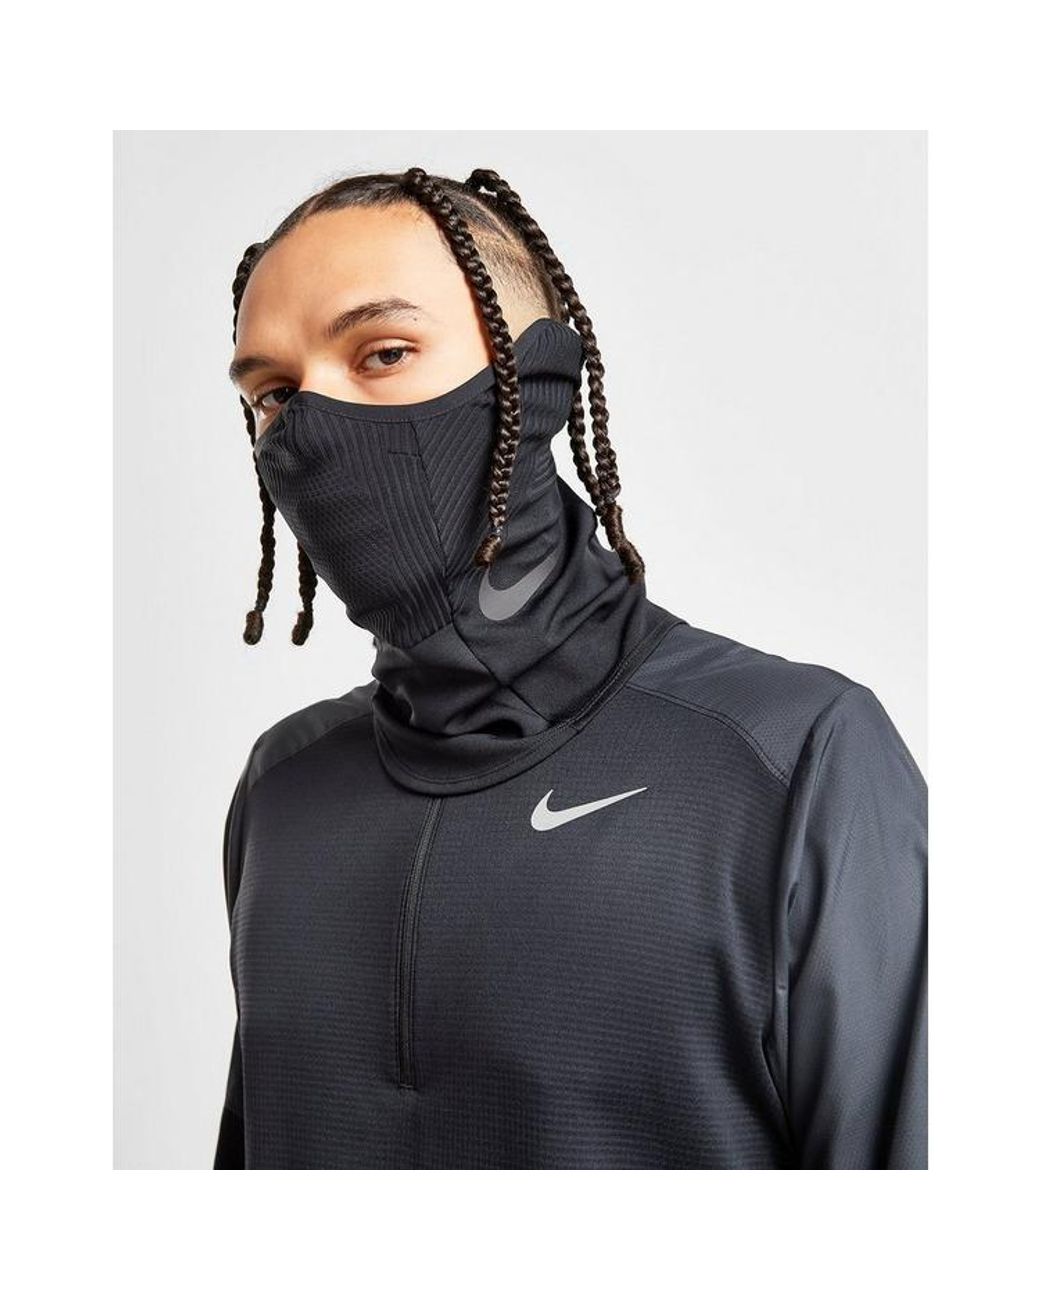 Nike Vaporknit Snood Norway, SAVE 41% - thlaw.co.nz